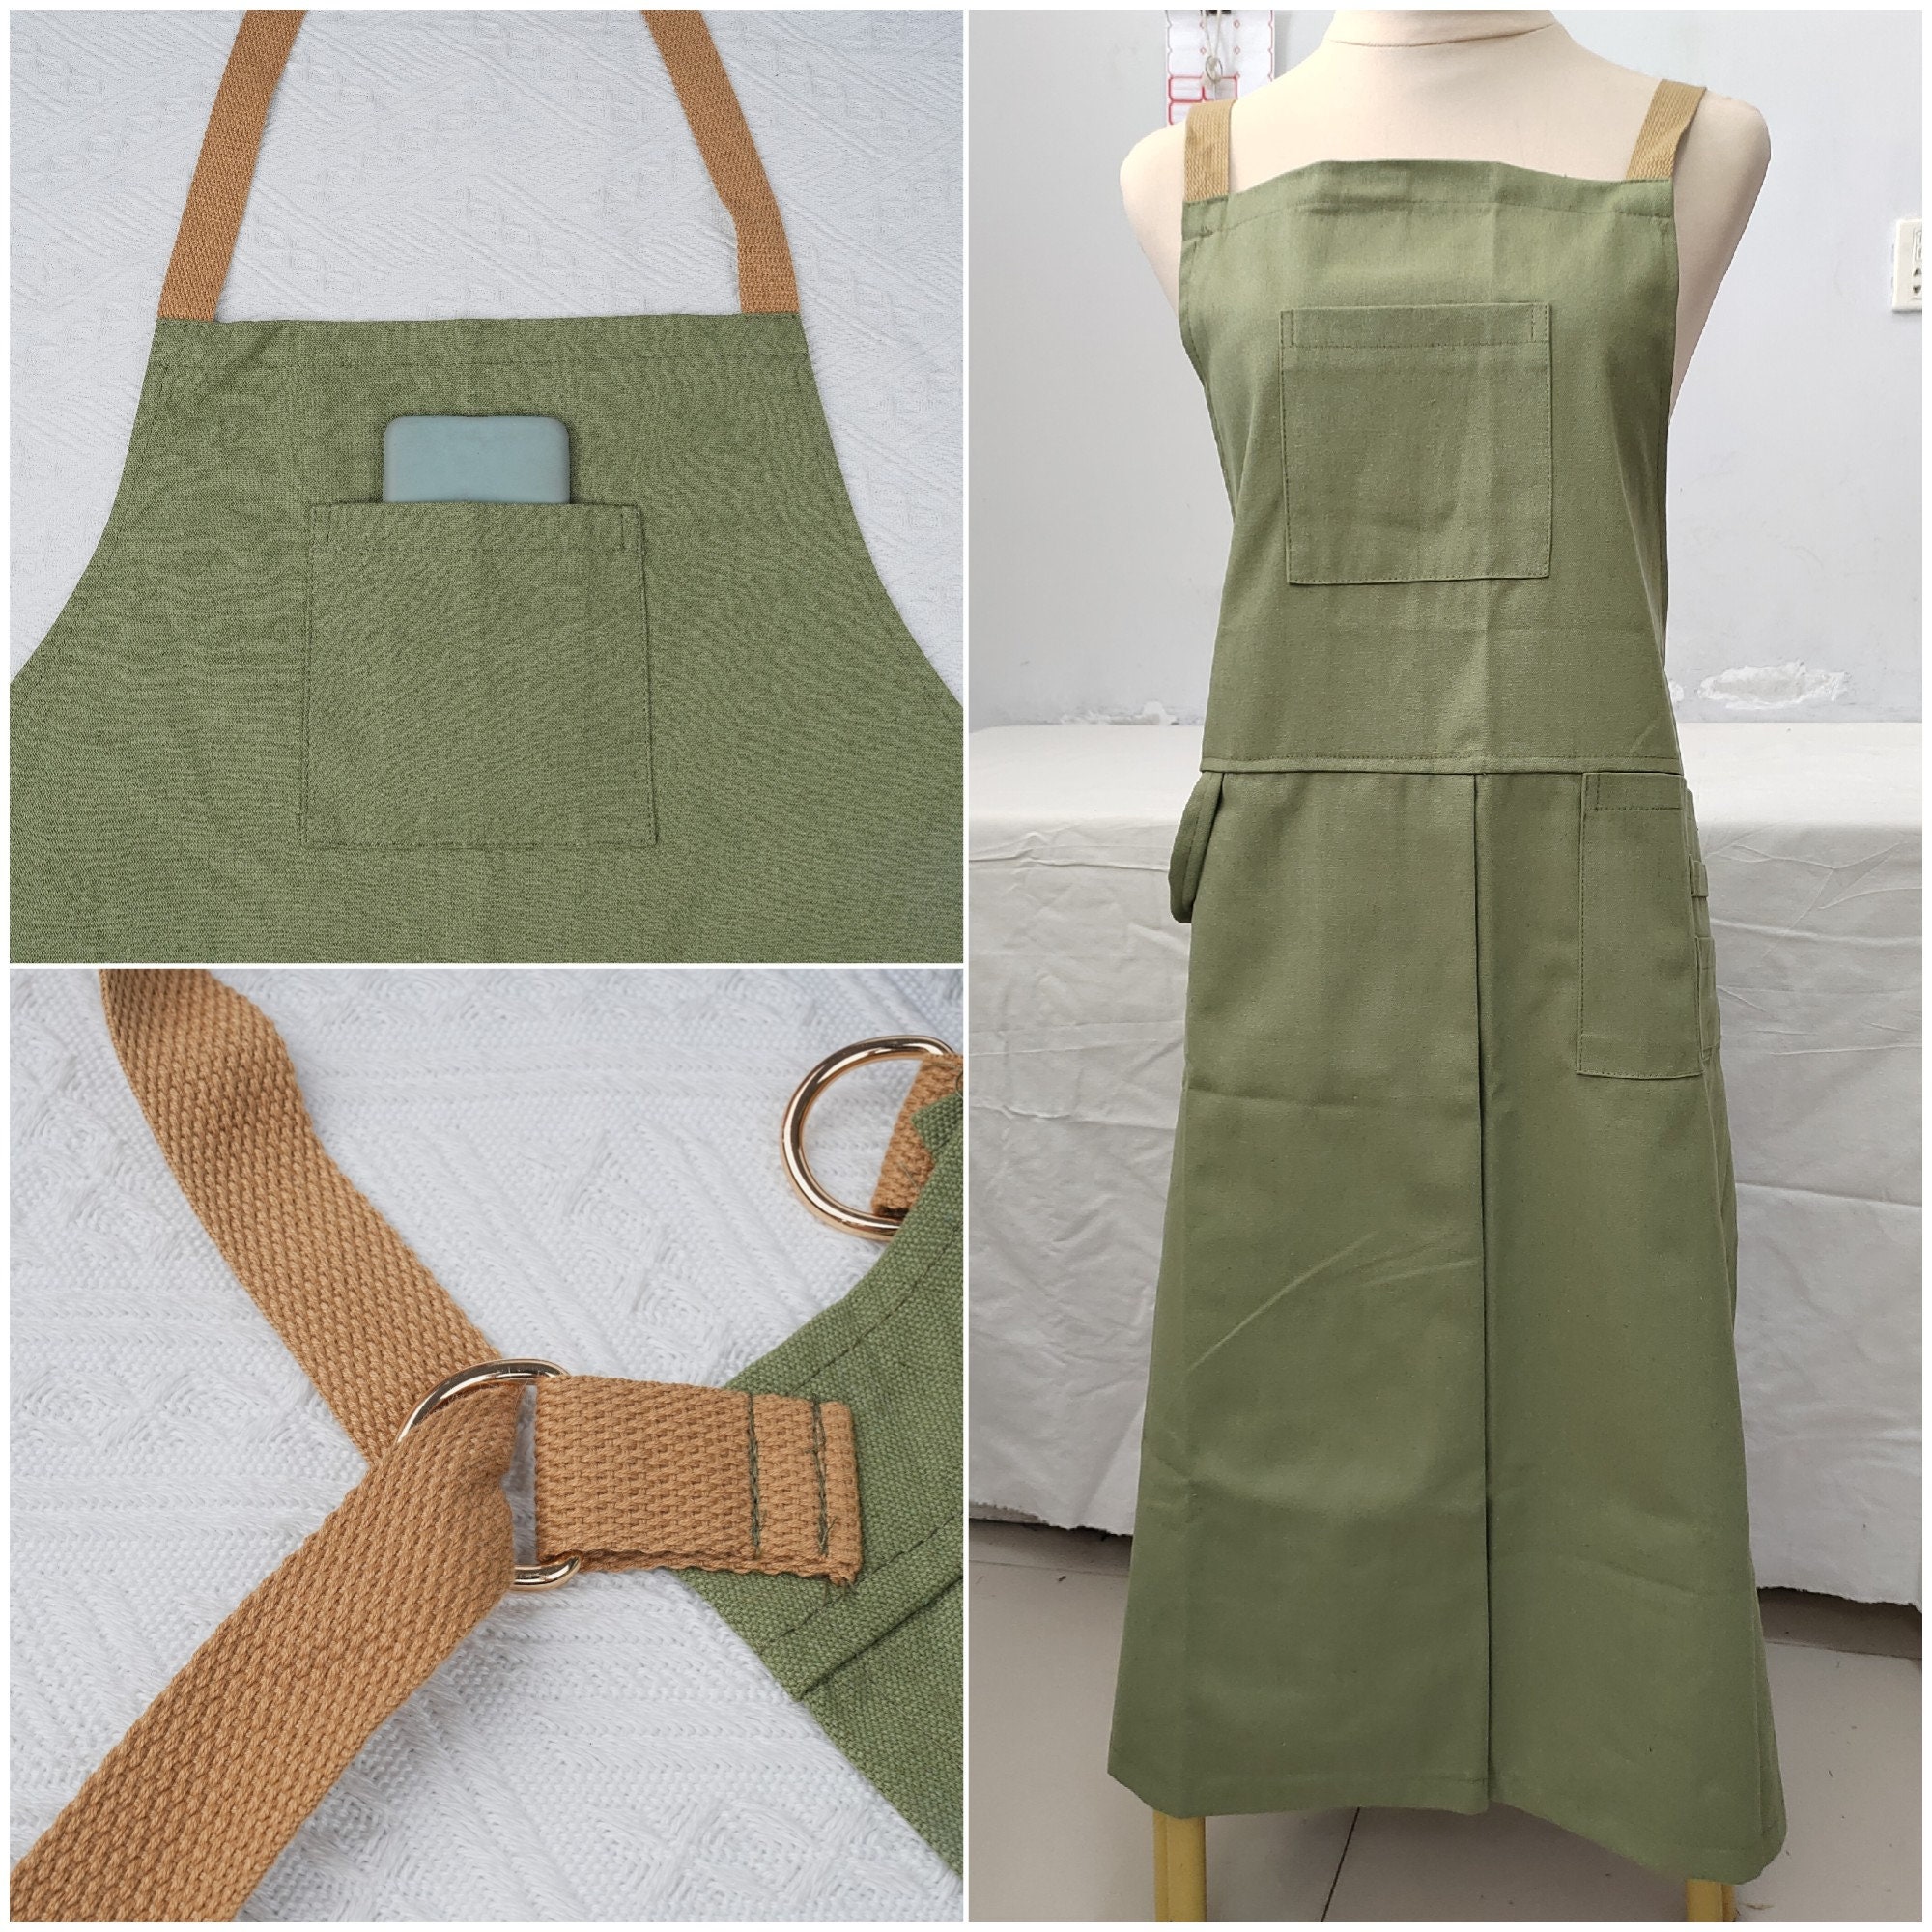 Pottery Apron With Split Leg and Pockets for Pottery Tools. Perfect for  Working With Clay Made With Canvas Material in Light Grey. 